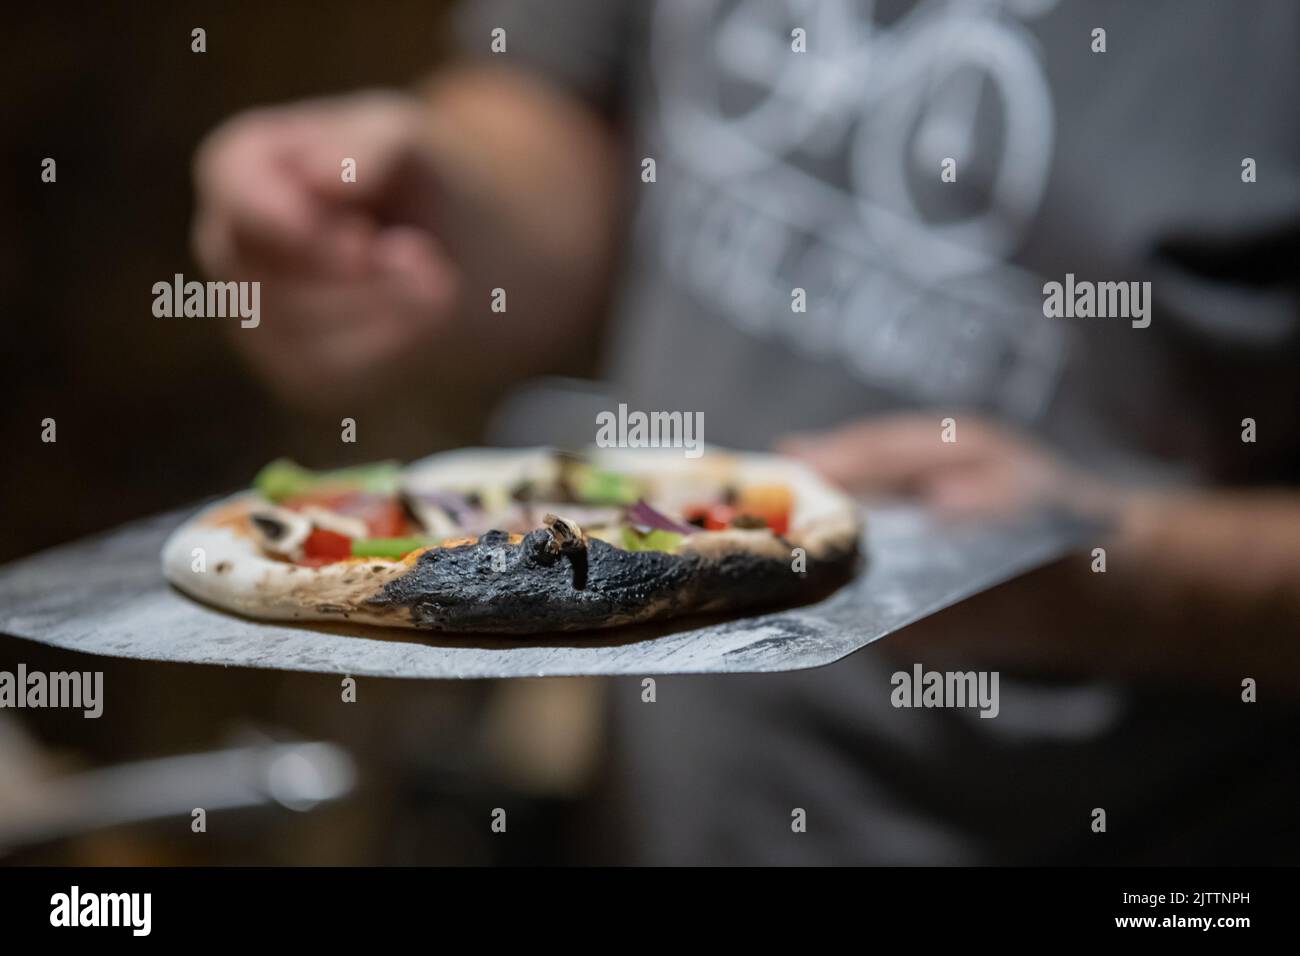 Man holding a burnt home made pizza in his hand. Pizza dough being burnt. Delicious pizza in home oven. Stock Photo